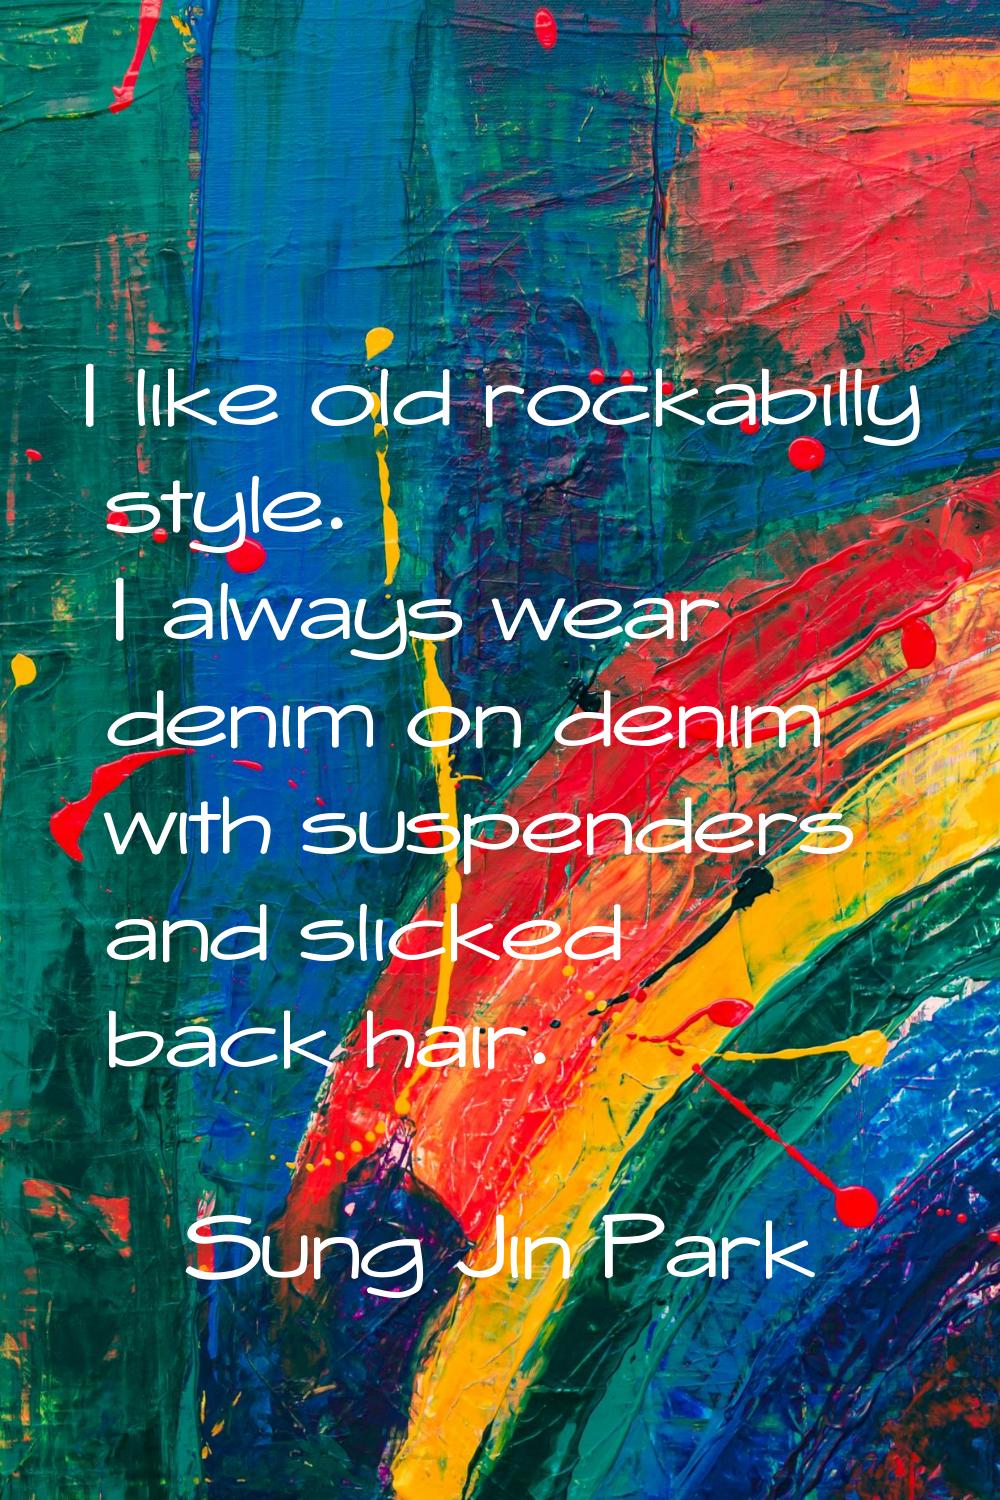 I like old rockabilly style. I always wear denim on denim with suspenders and slicked back hair.